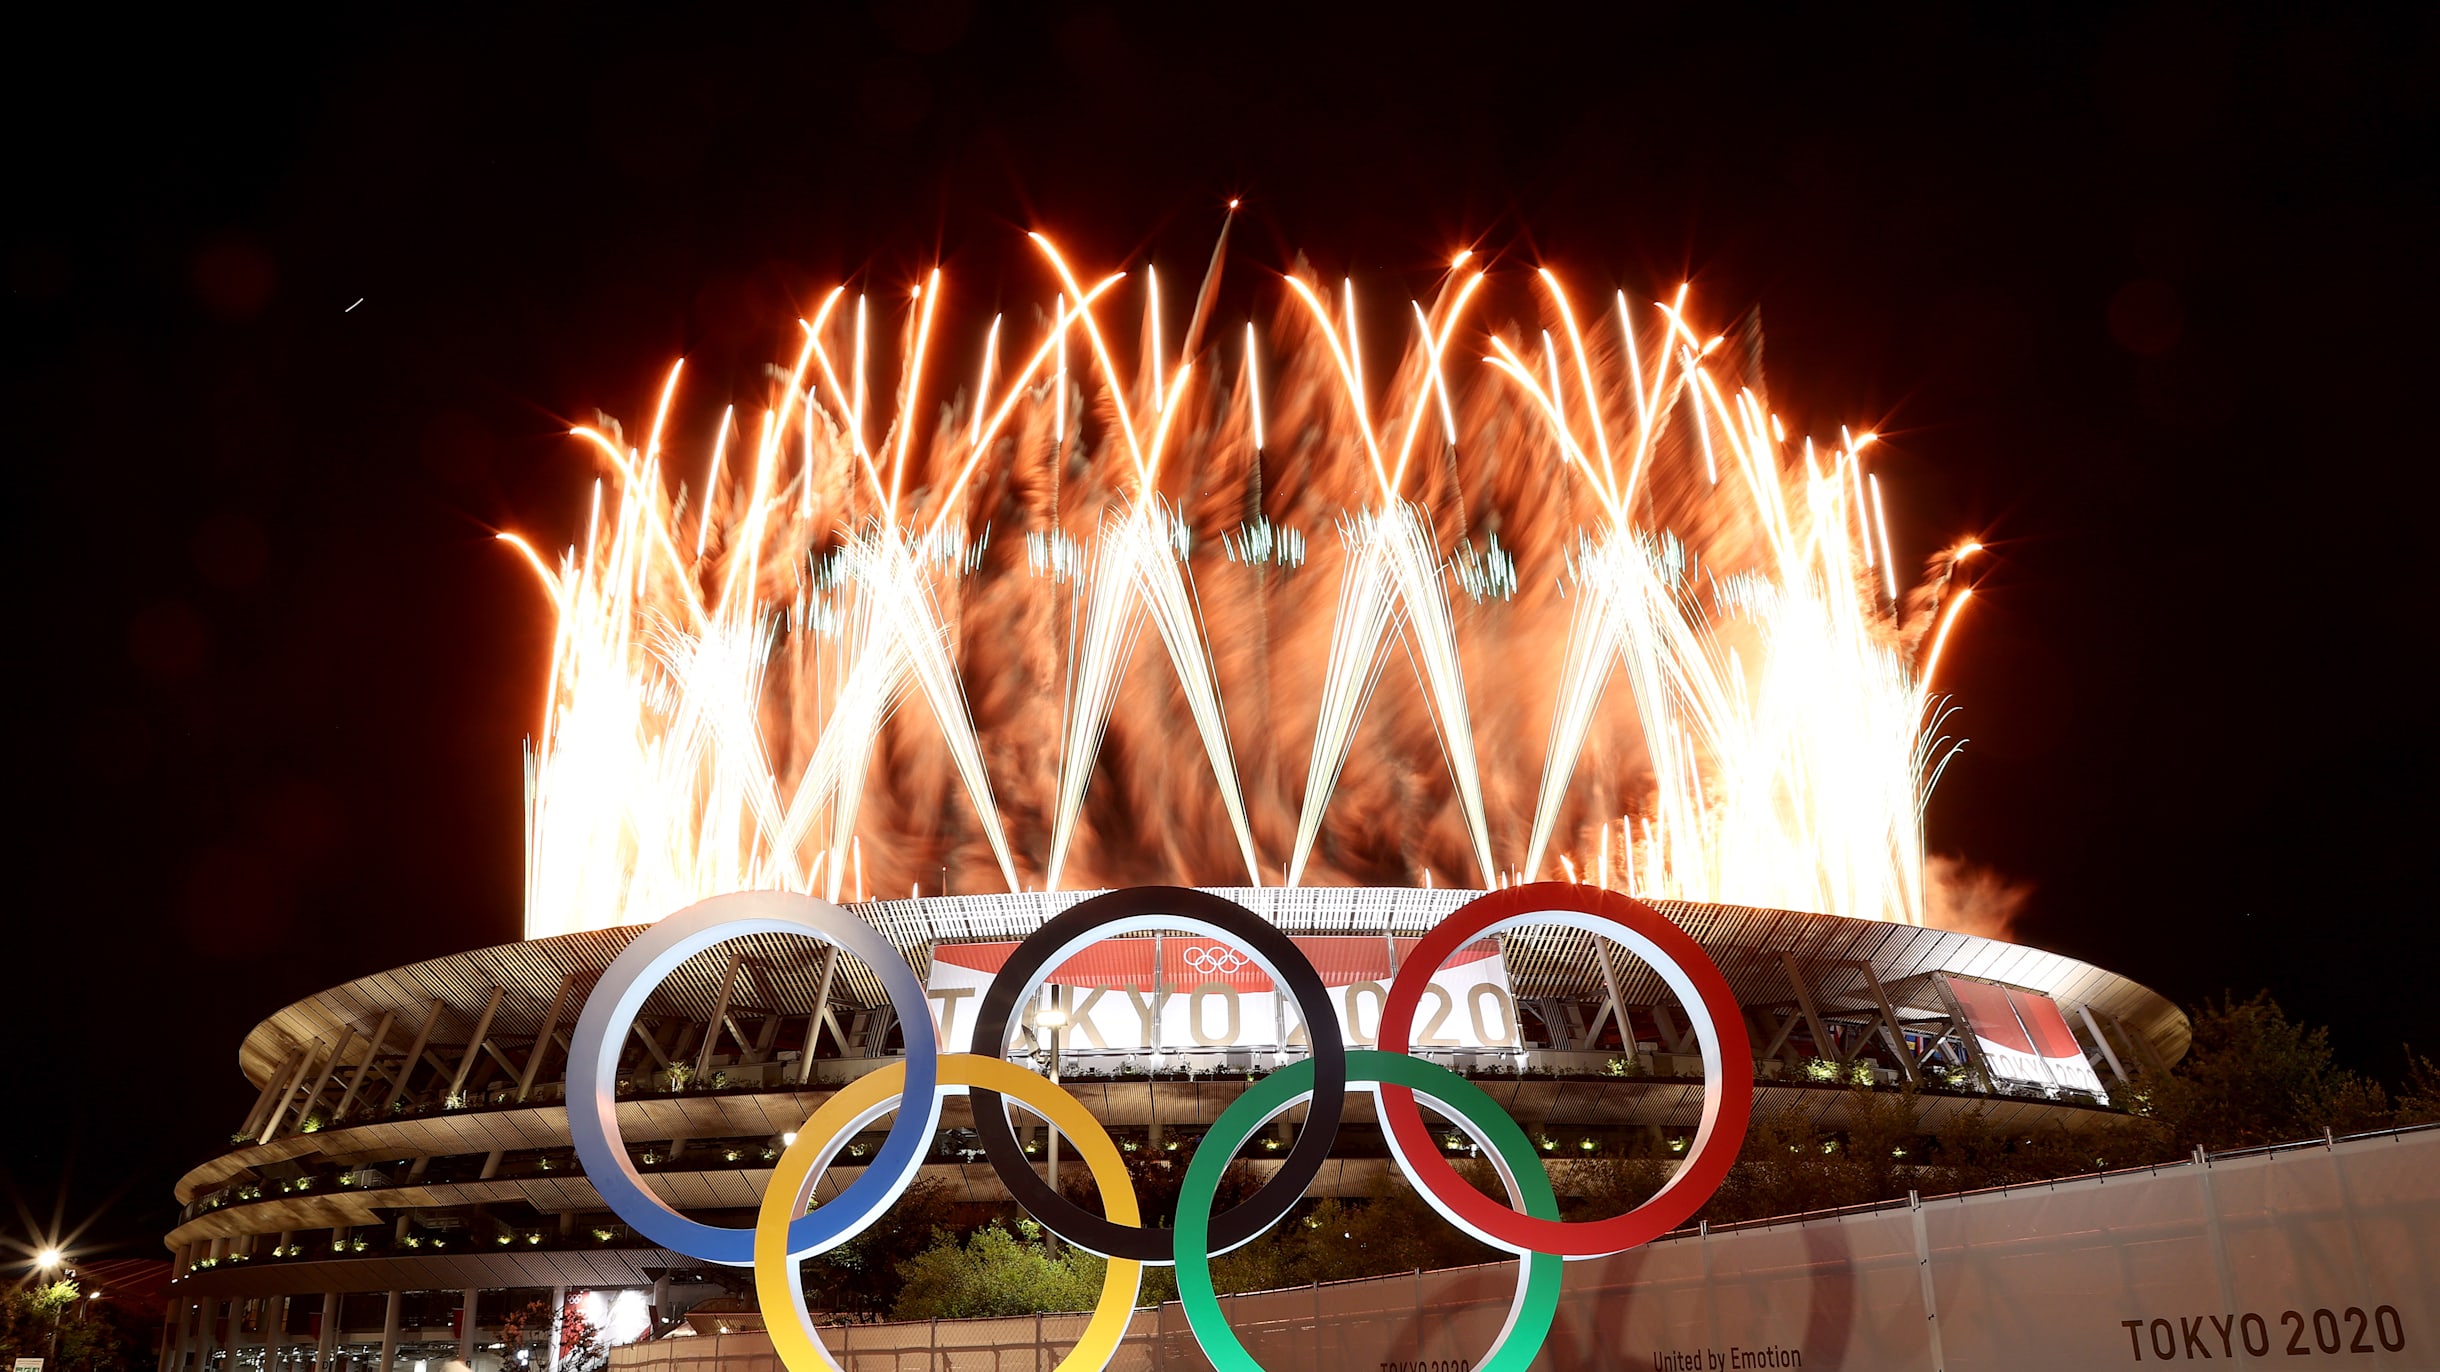 Which colour represents Asia in Olympic Rings?